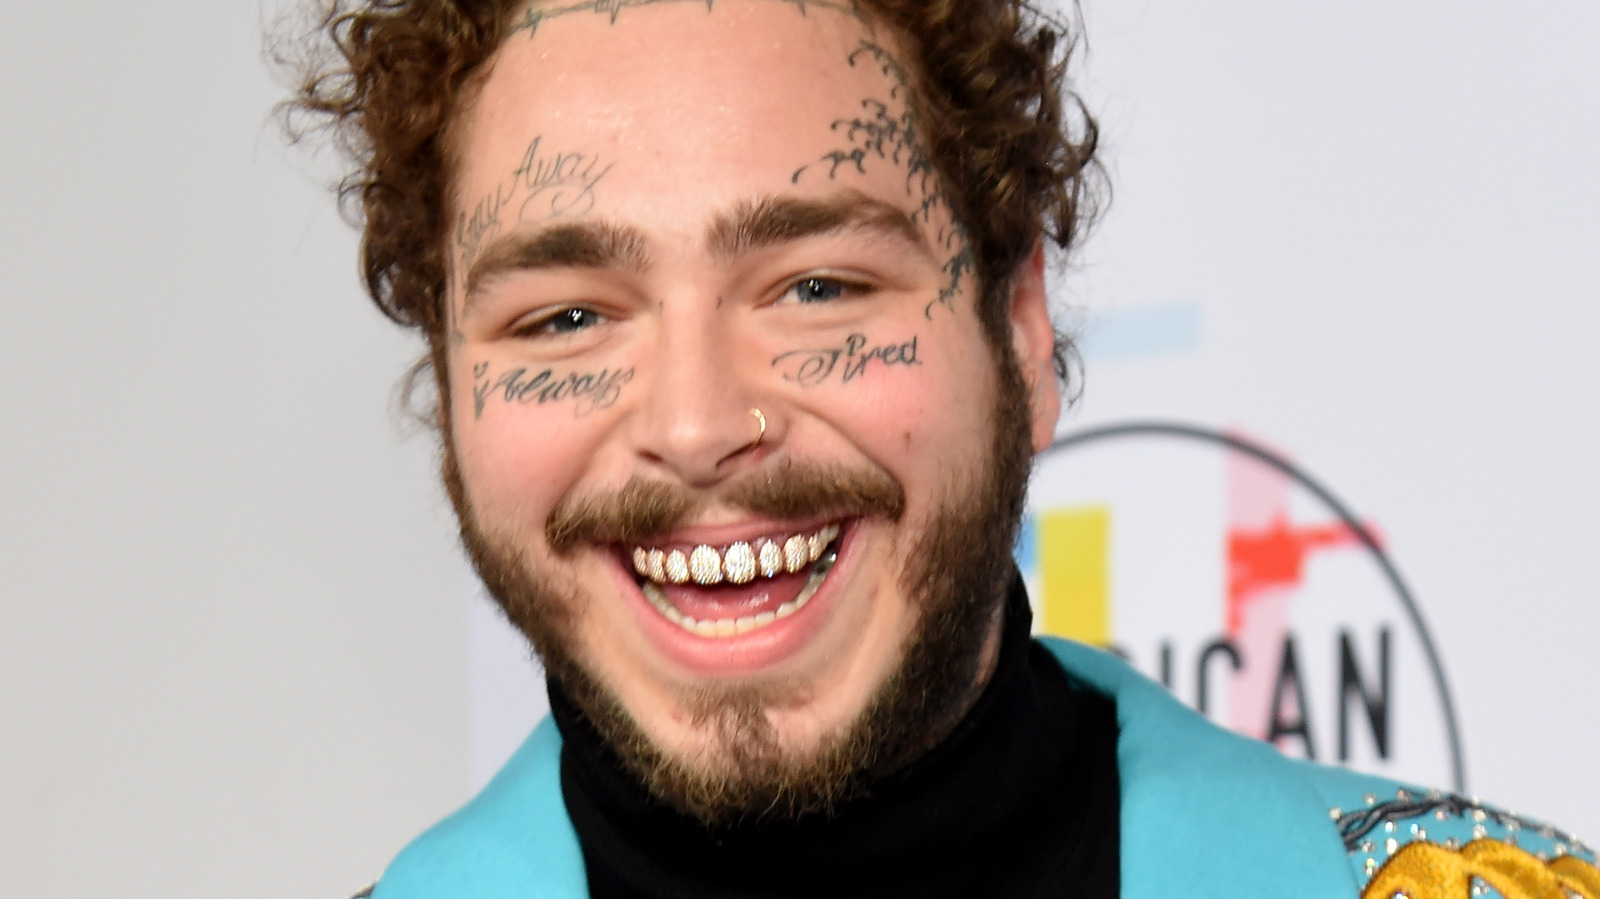 Here's What Post Malone's Tattoos Really Mean